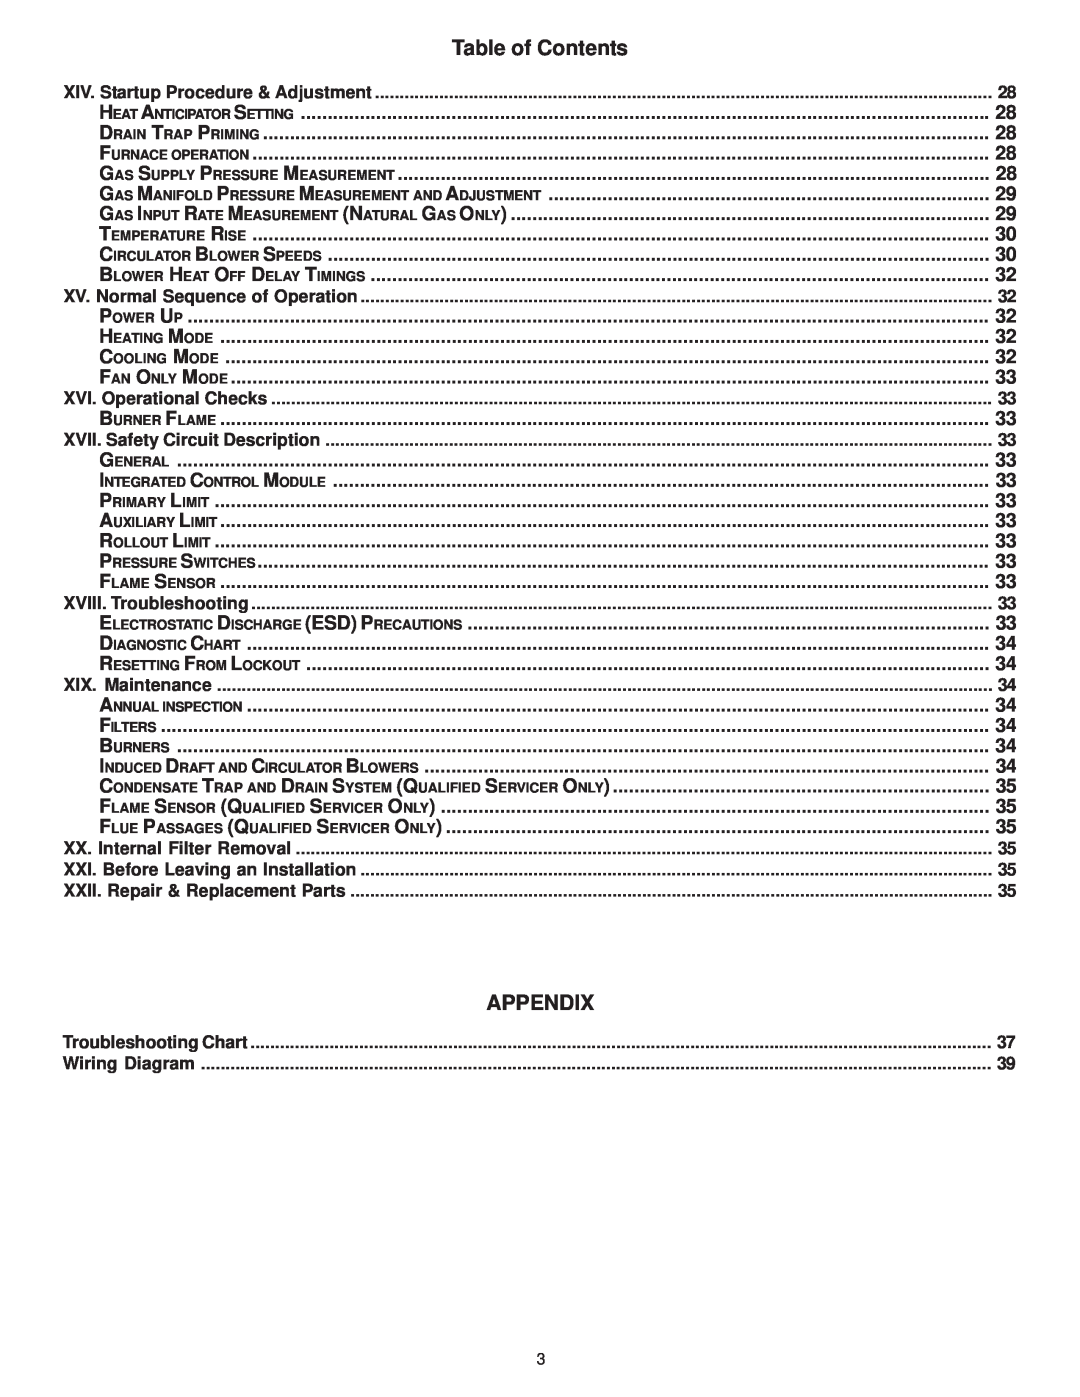 Amana ACV9, AMV9 installation instructions Appendix, Table of Contents 